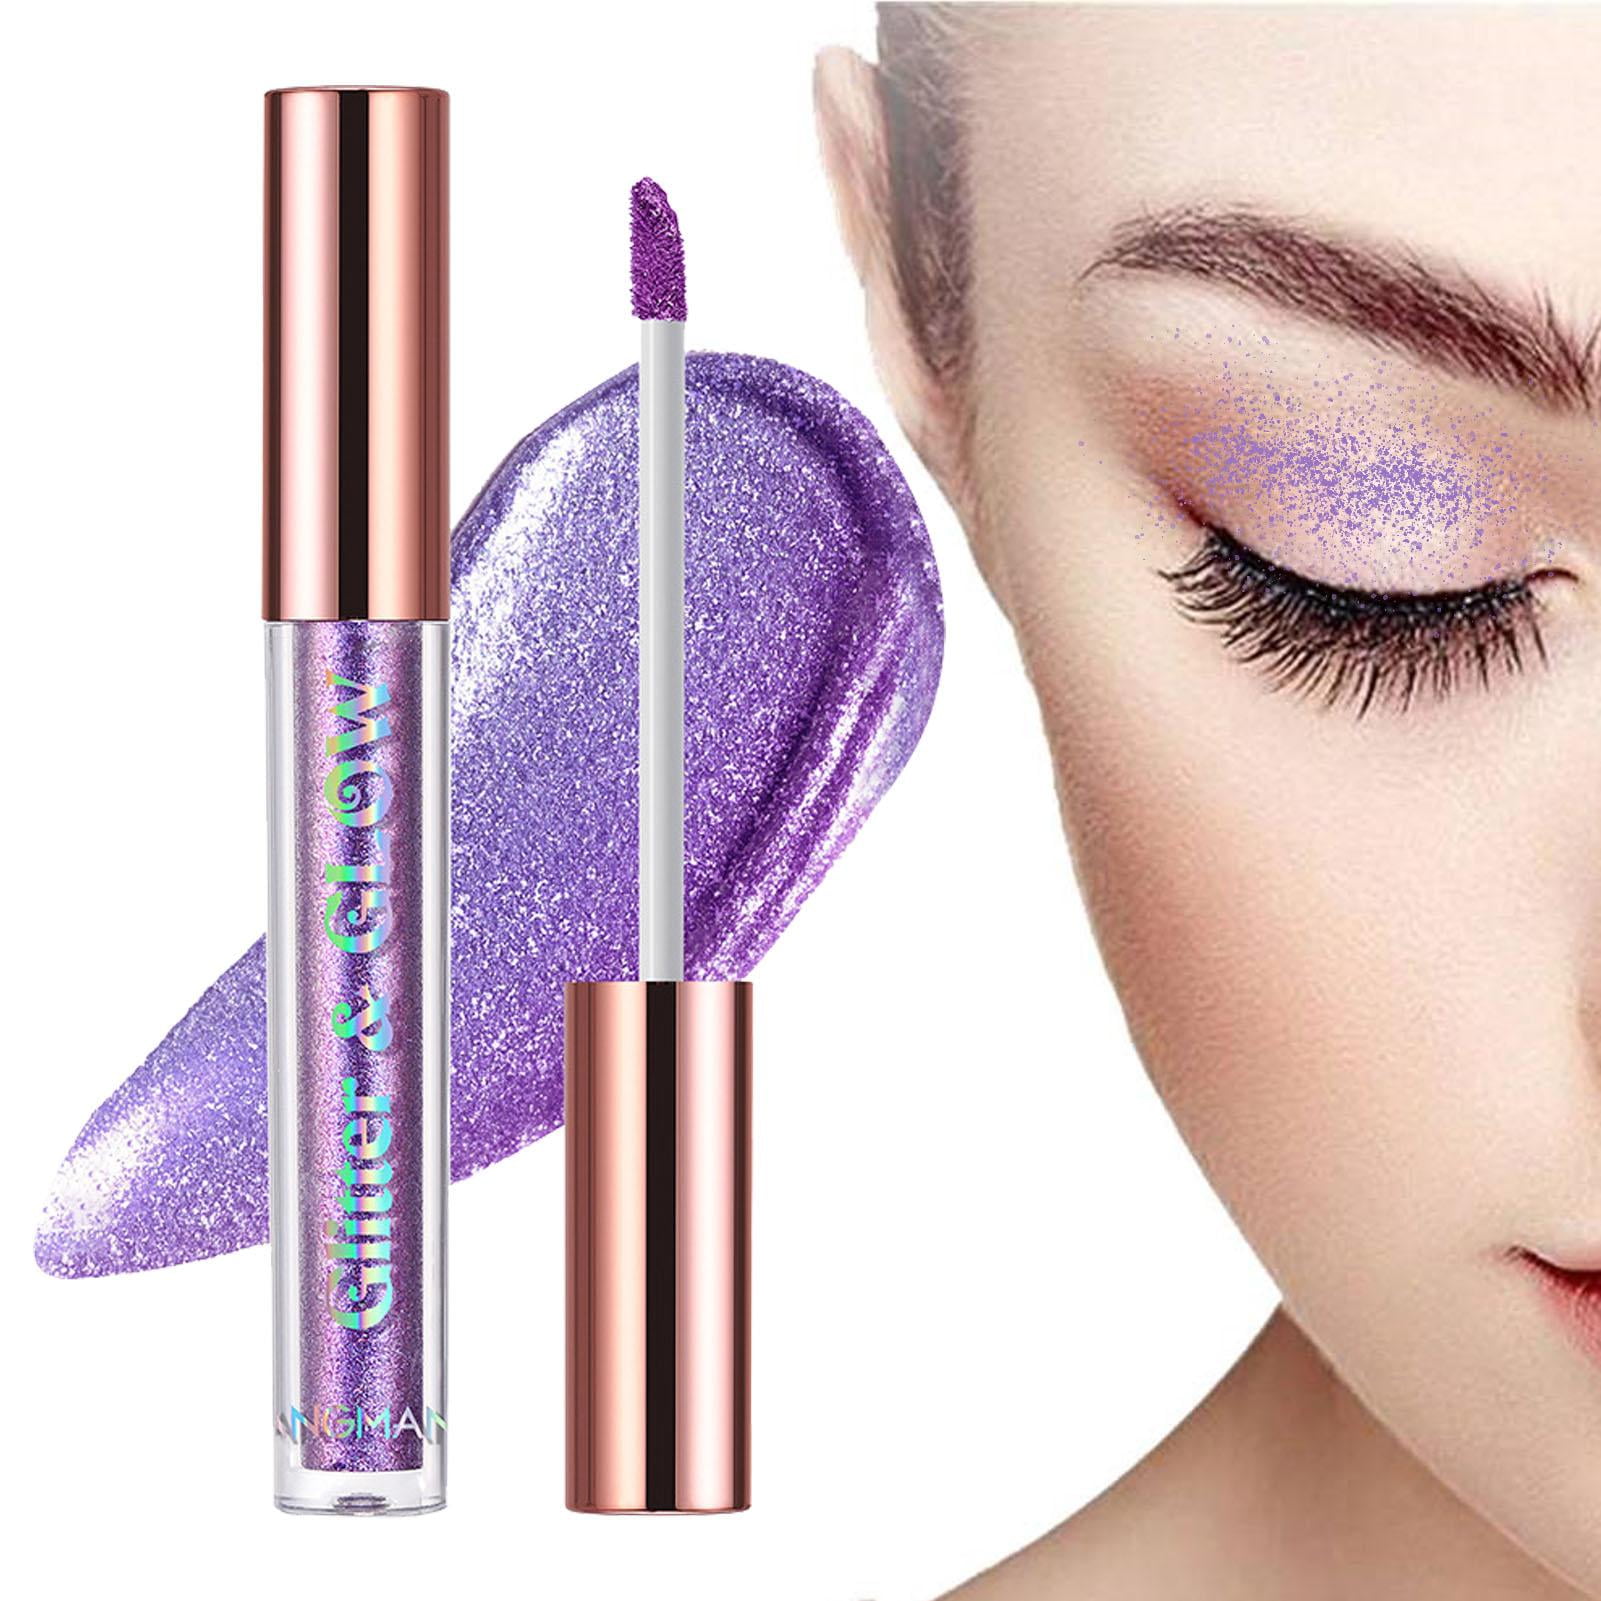 Hotiary Chameleon Eyeshadow Metallic High Pigments Makeup Metals Gloss  Shimmer Shining Eye Shadow for Eyes Sparkling Pen Kit Gift for Lady (6  Colors Chameleon Eyeshadow)